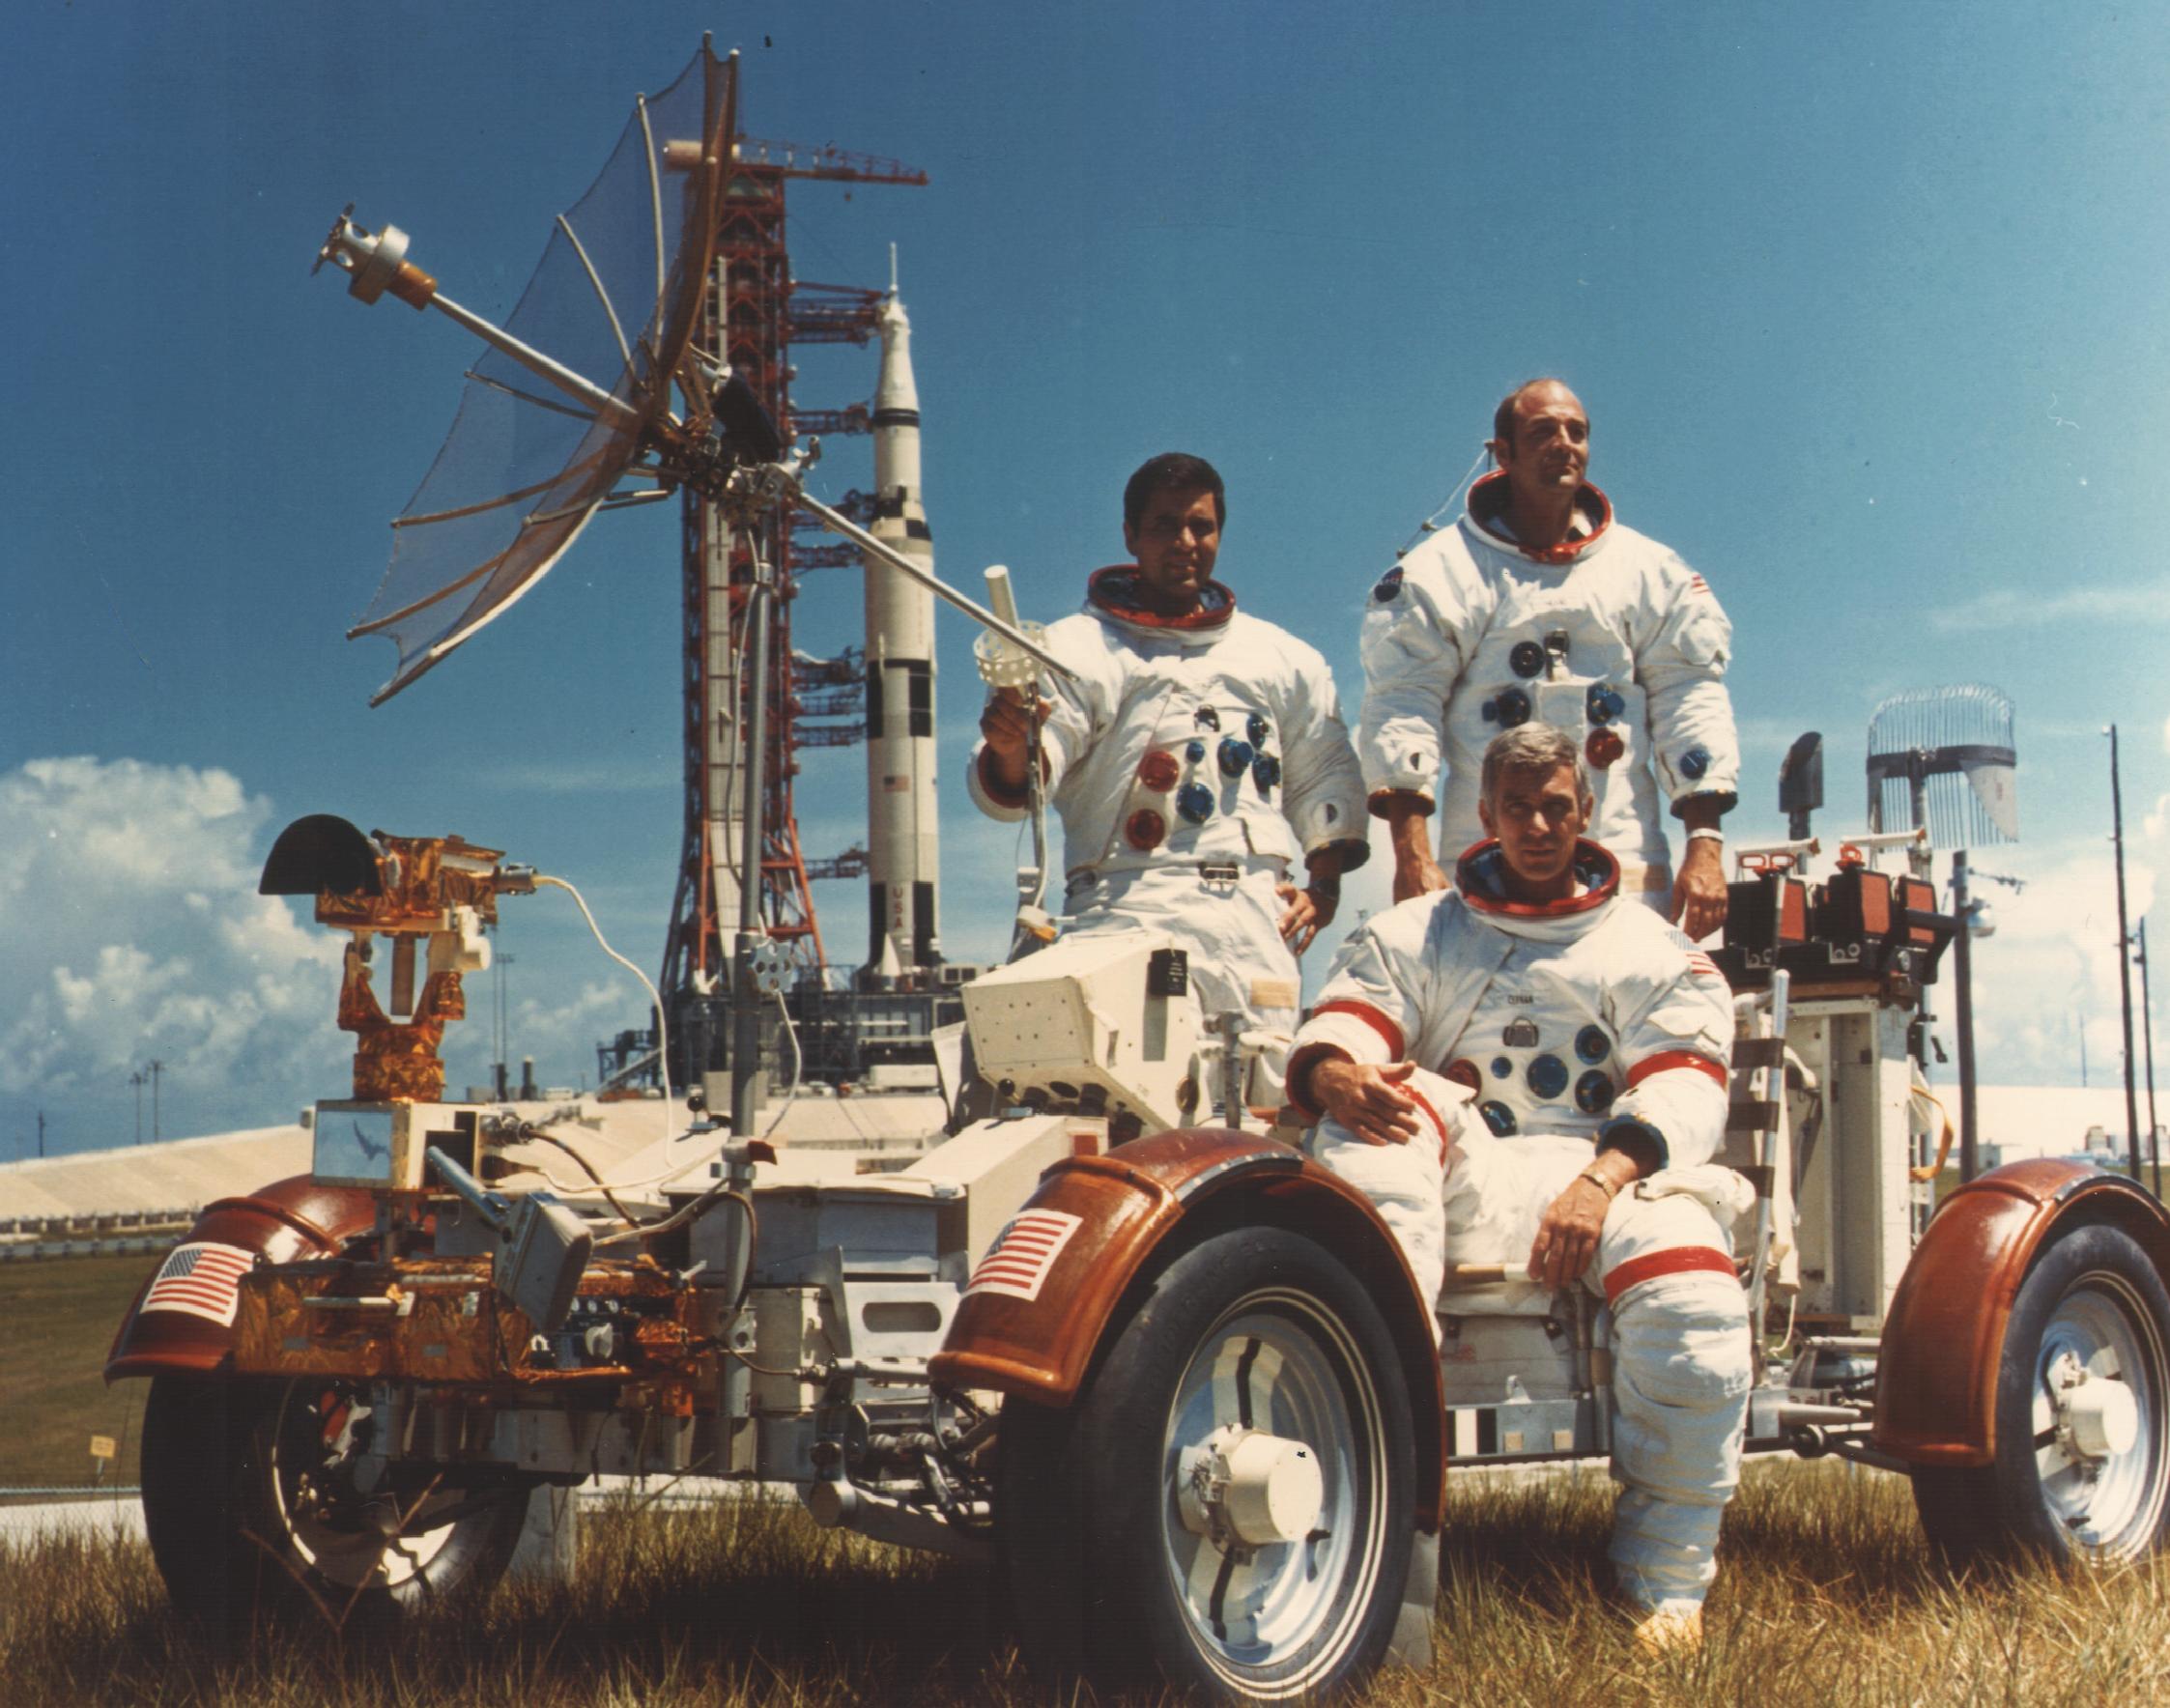 The crew of Apollo 17, Harrison H. Schmitt, Eugene A. Cernan, and Ron Evans, pose with a Lunar Roving Vehicle trainer.